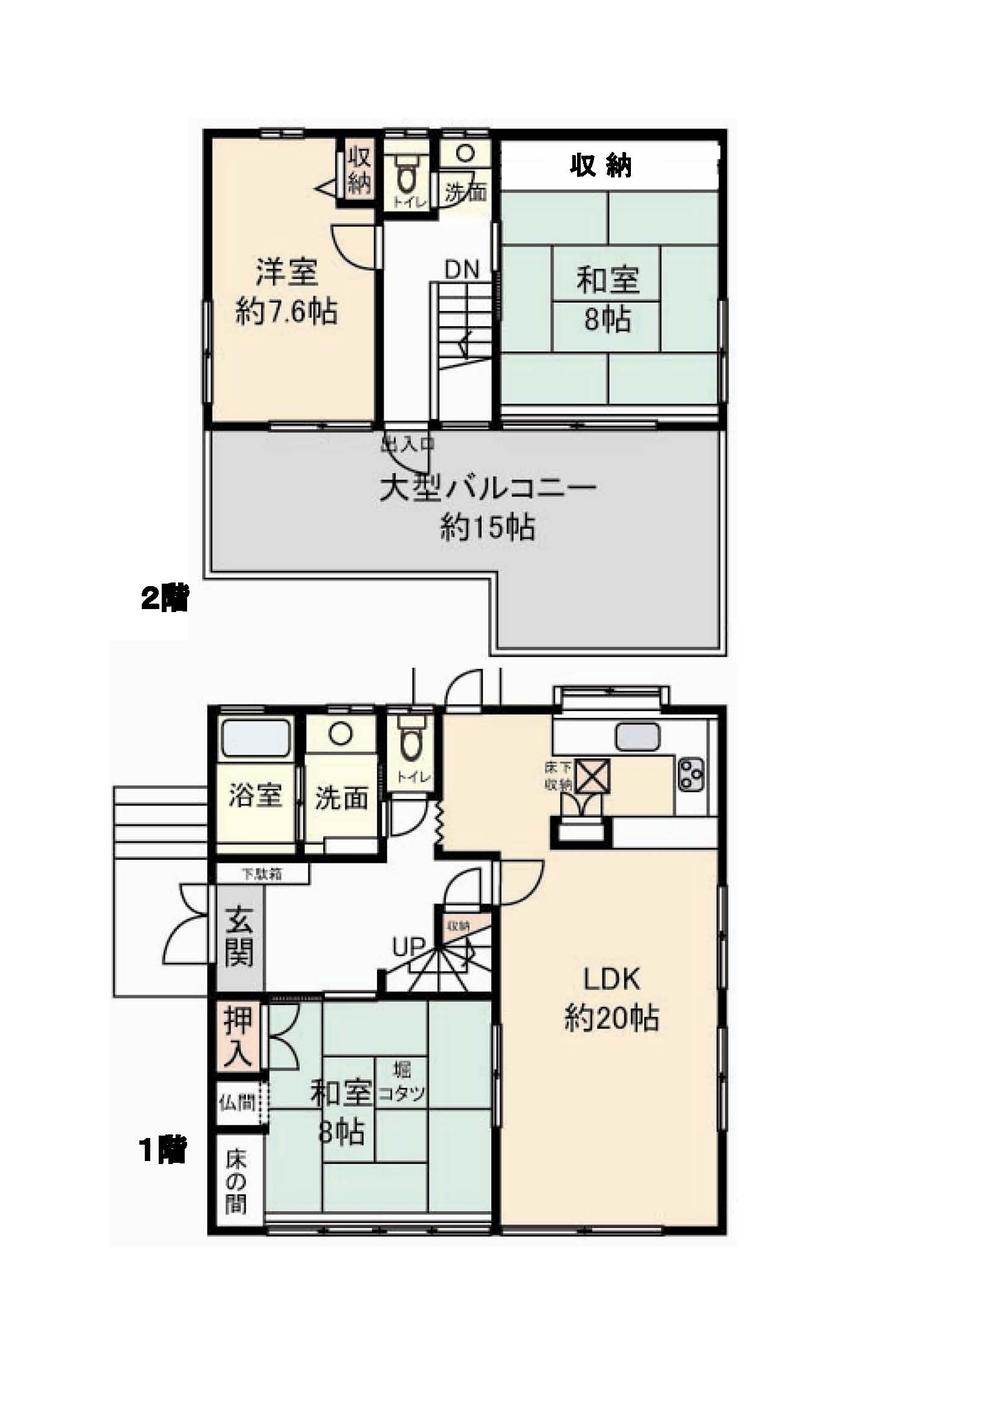 Floor plan. 63 million yen, 3LDK, Land area 206.89 sq m , The building area of ​​114.71 sq m each room, There accommodated. 